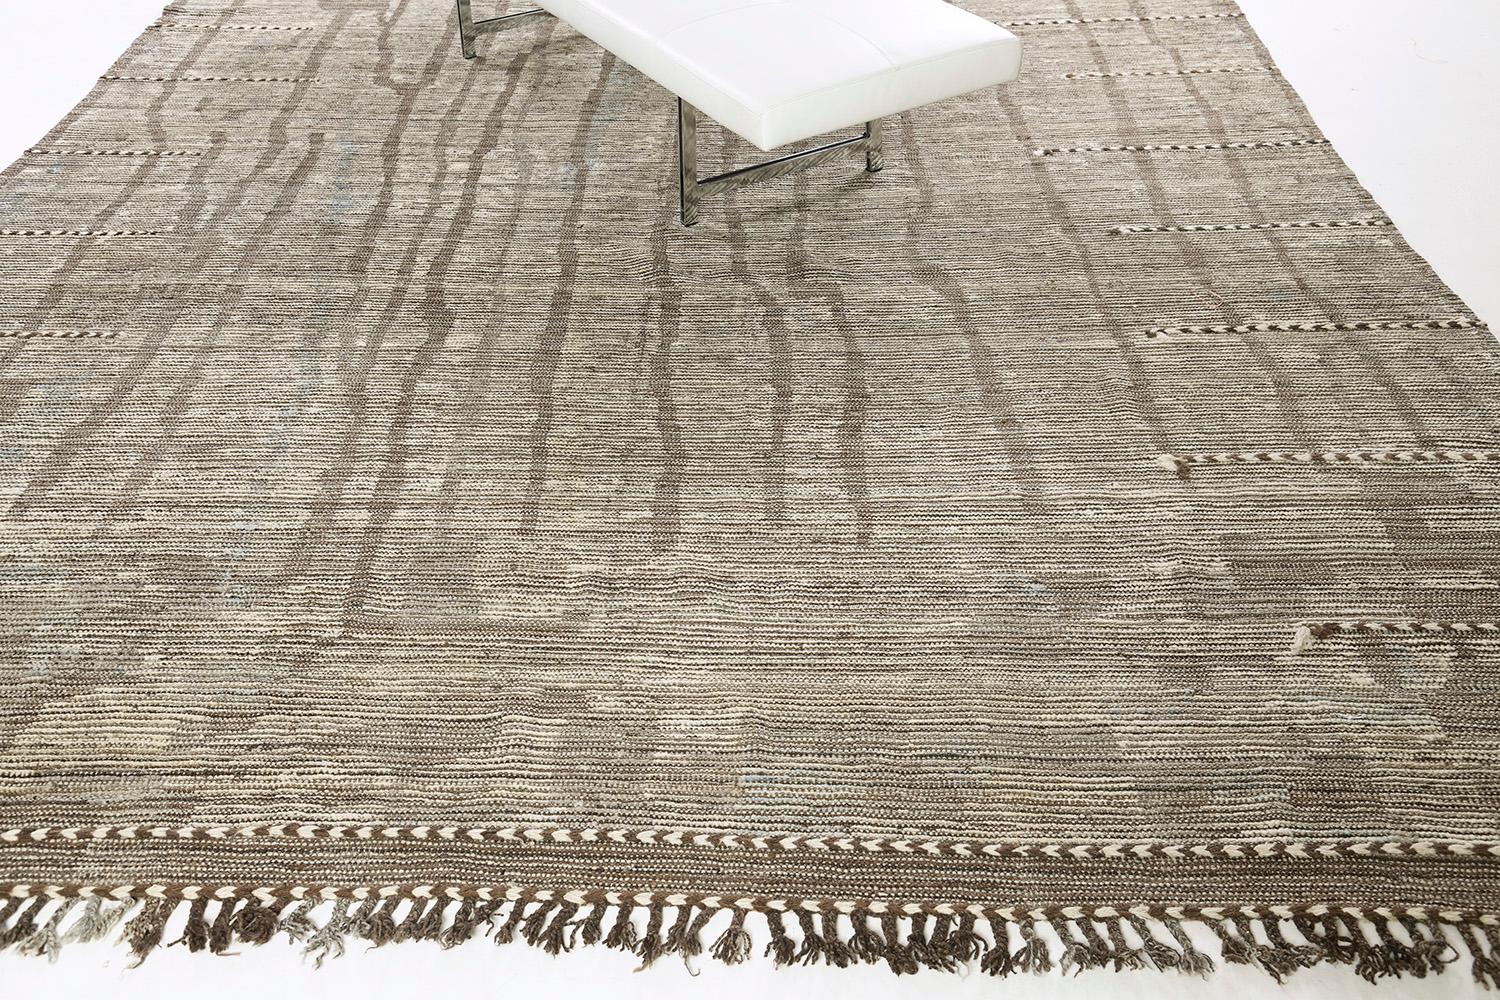 Berberis is an interplay between neutral tones and soothing shades into a modern-day interpretation of the Moroccan world. This rug's play of textures, linework, and simplicity is what makes the Atlas Collection so unique and sought after.